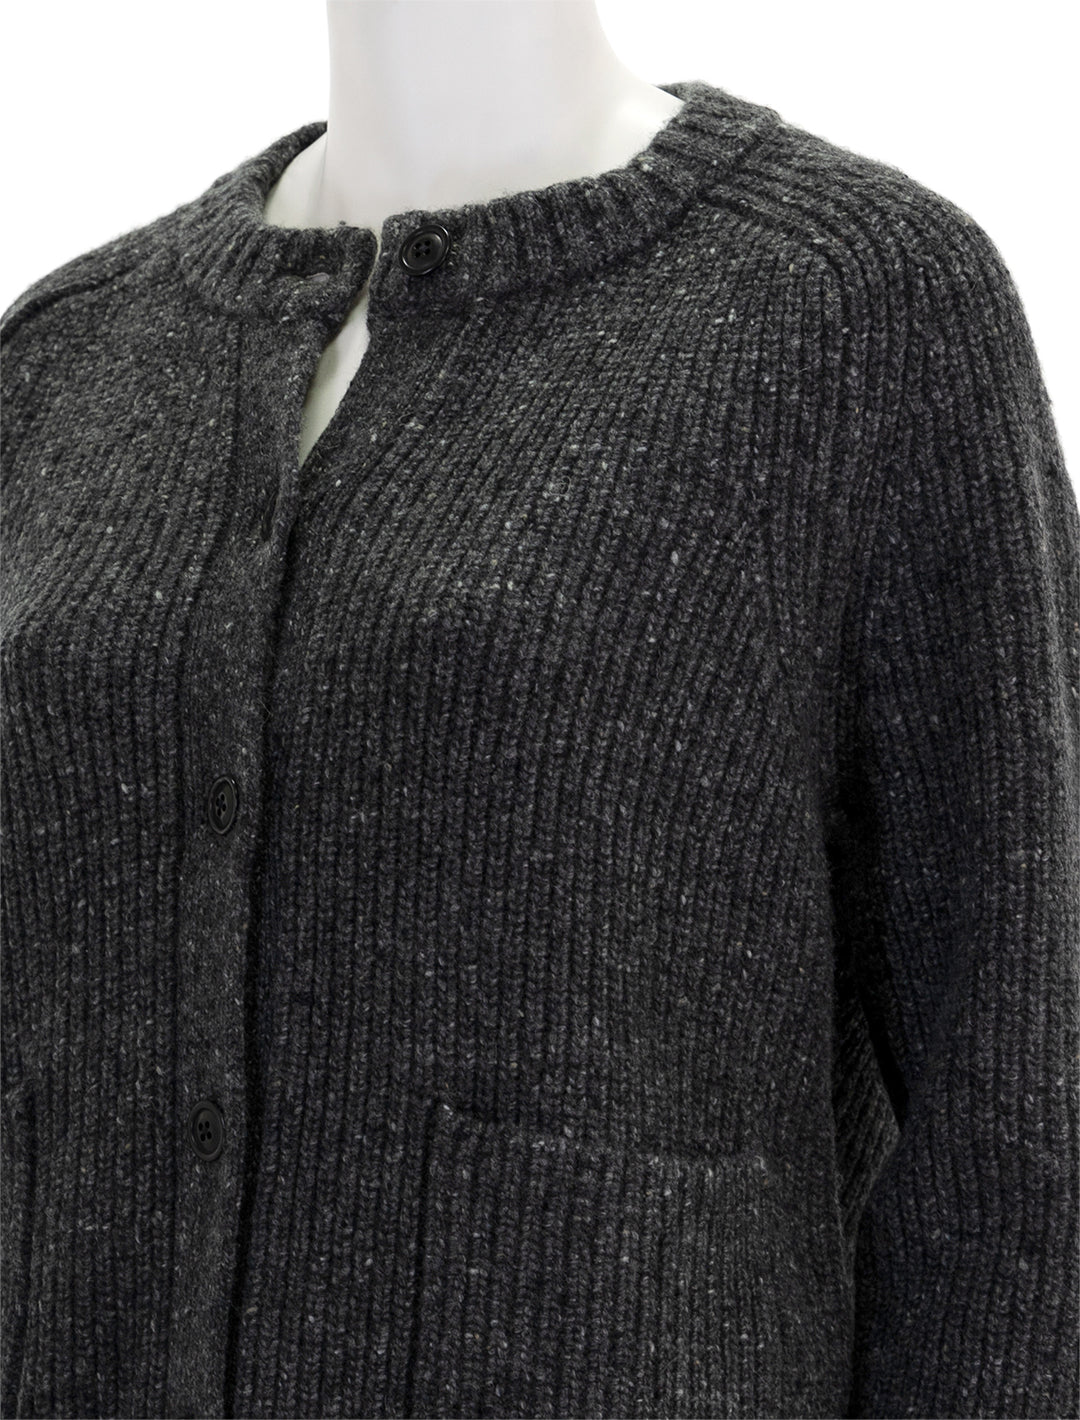 Close-up view of Alex Mill's chunky rib cardigan in charcoal donegal.